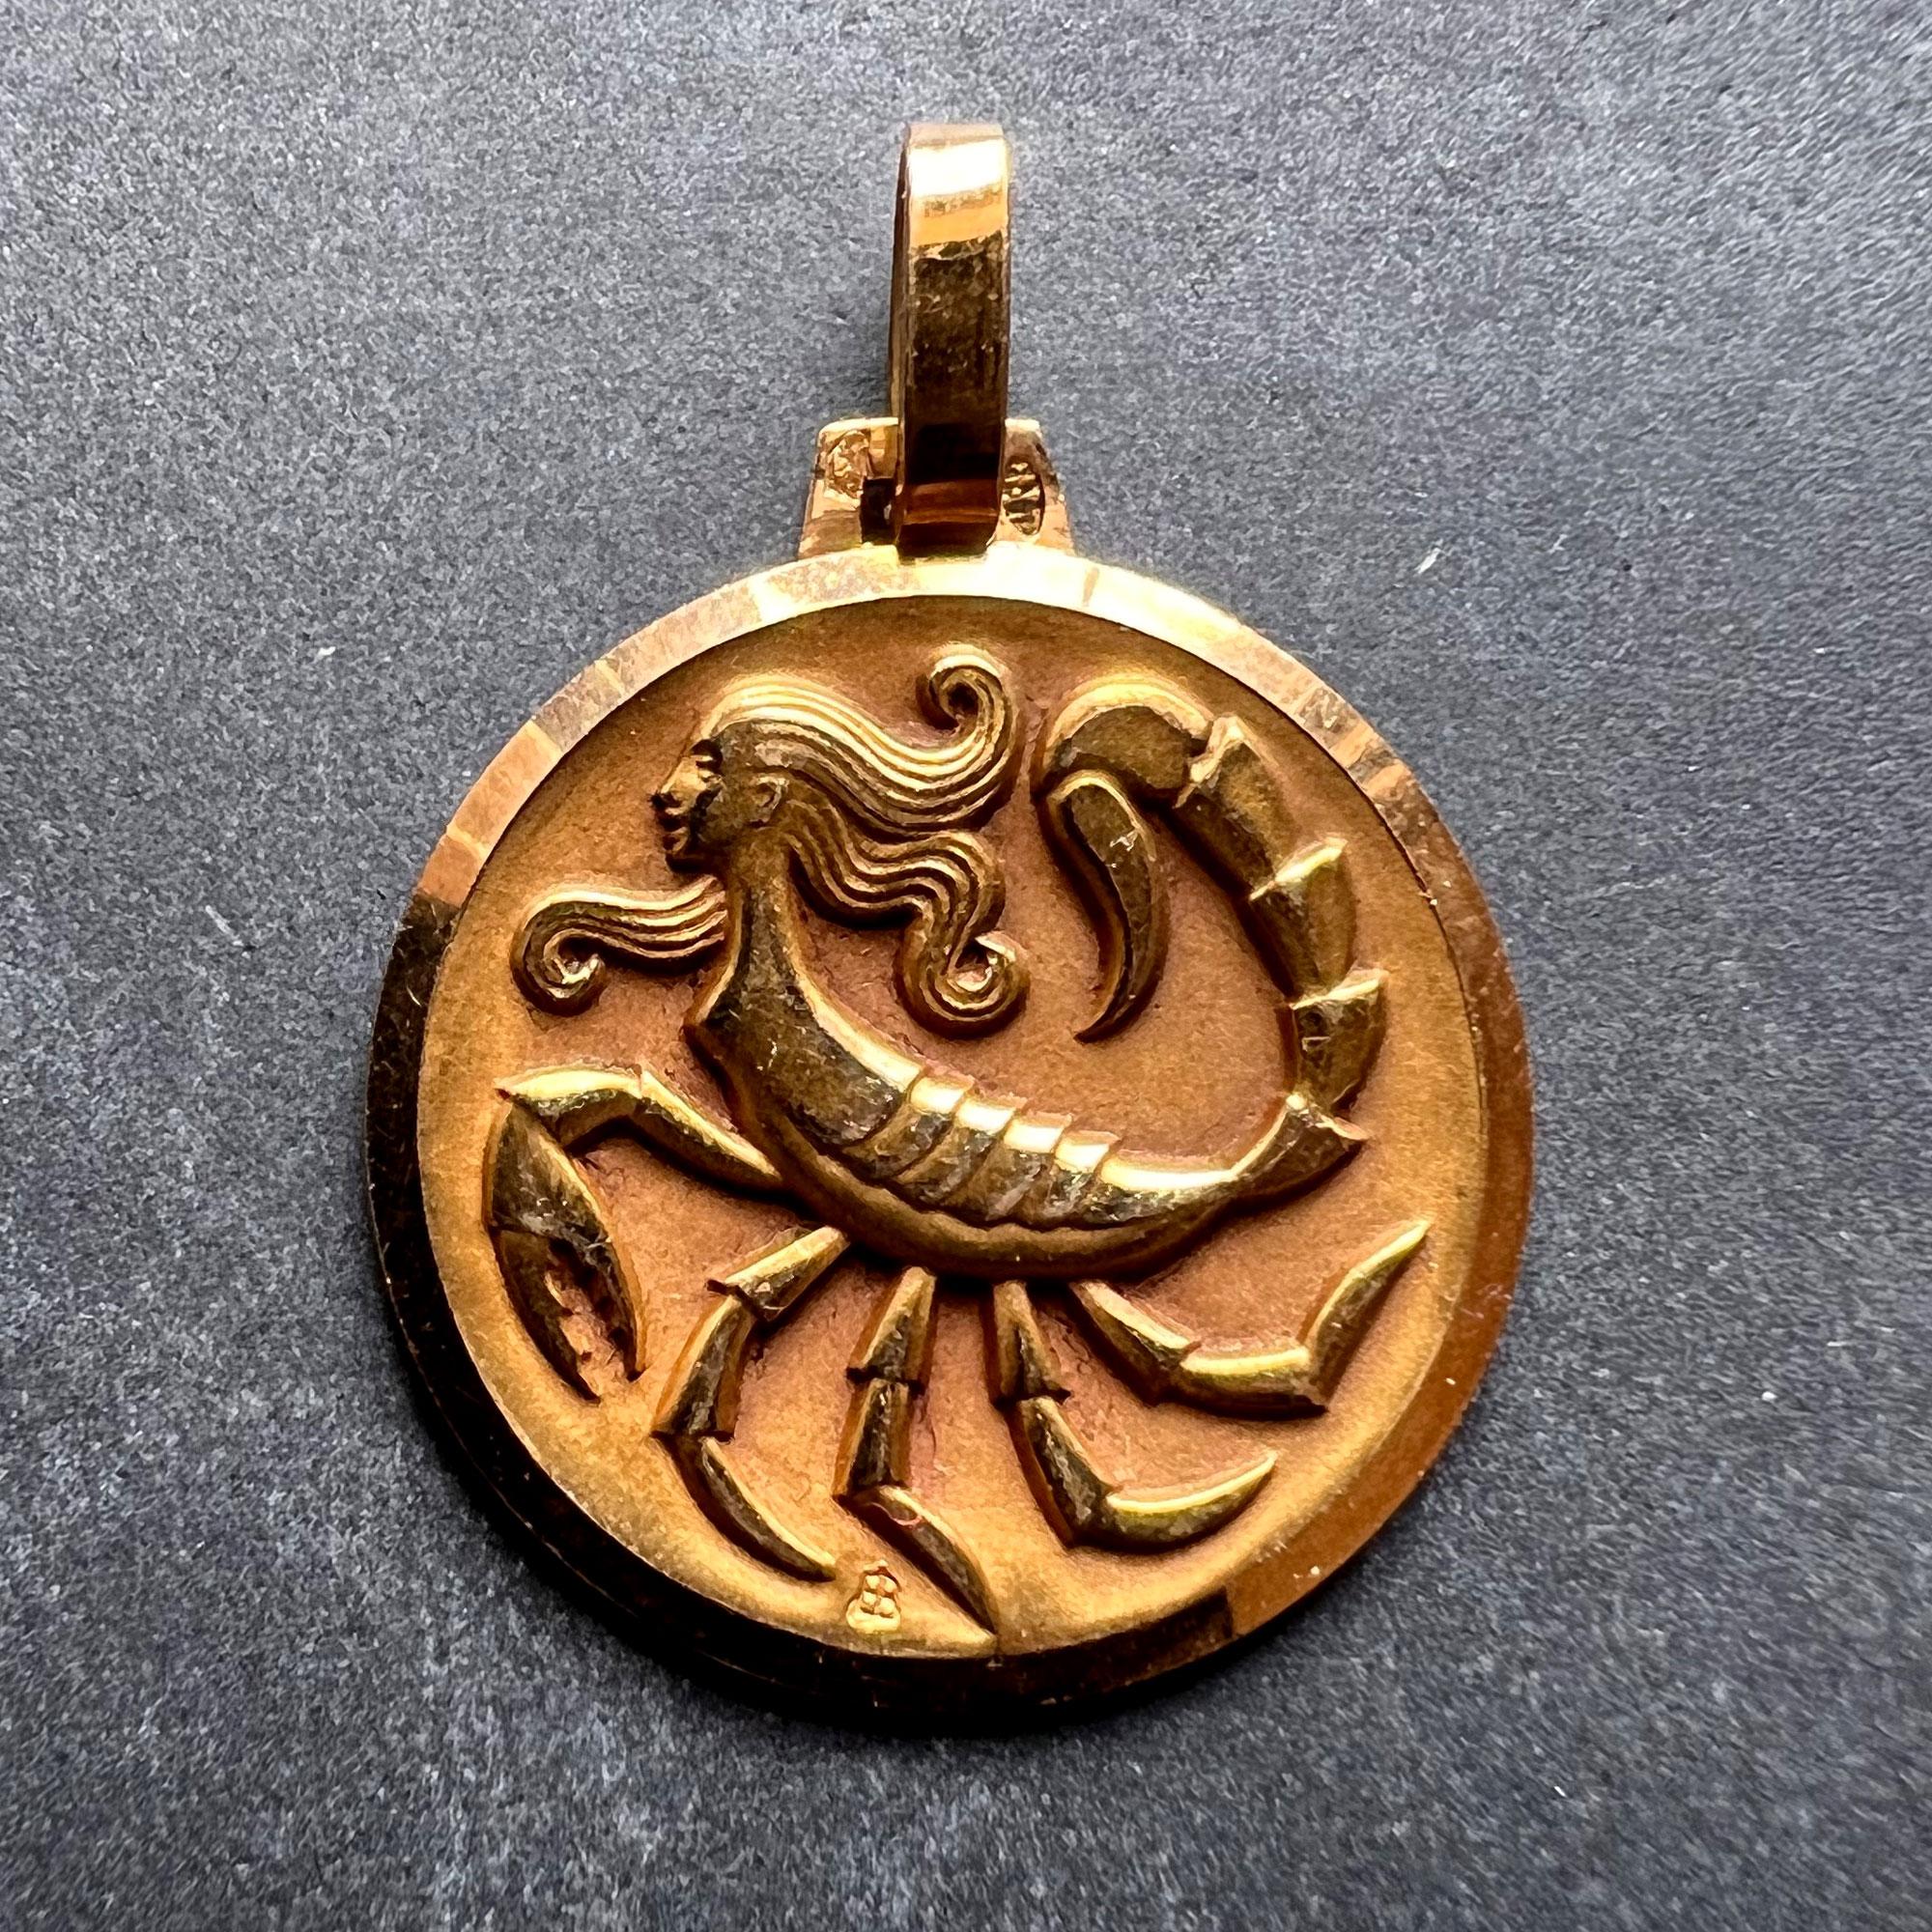 A French 18 karat (18K) yellow gold charm pendant depicting the Zodiac starsign of Scorpio as a mythical creature with the head and upper body of a woman and the lower body of a scorpion. Stamped with the eagles head for French manufacture and 18